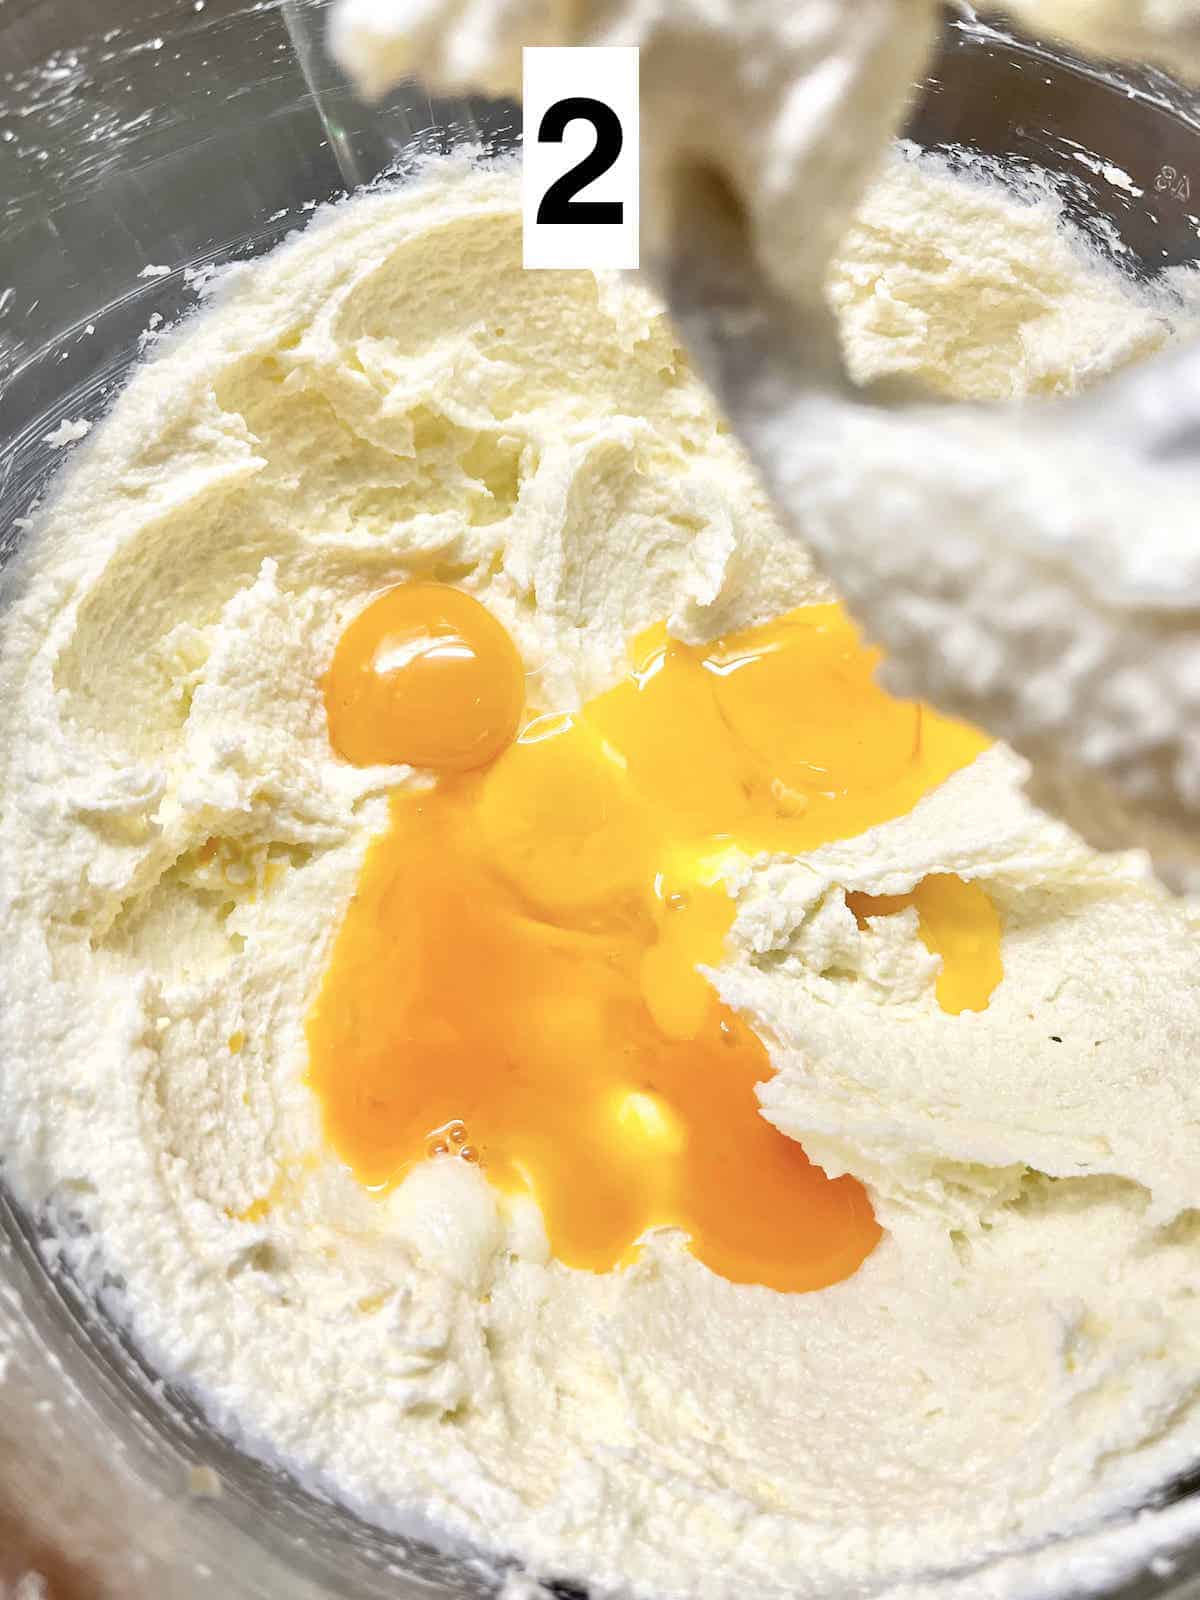 Close-up of egg yolks on creamed dough.